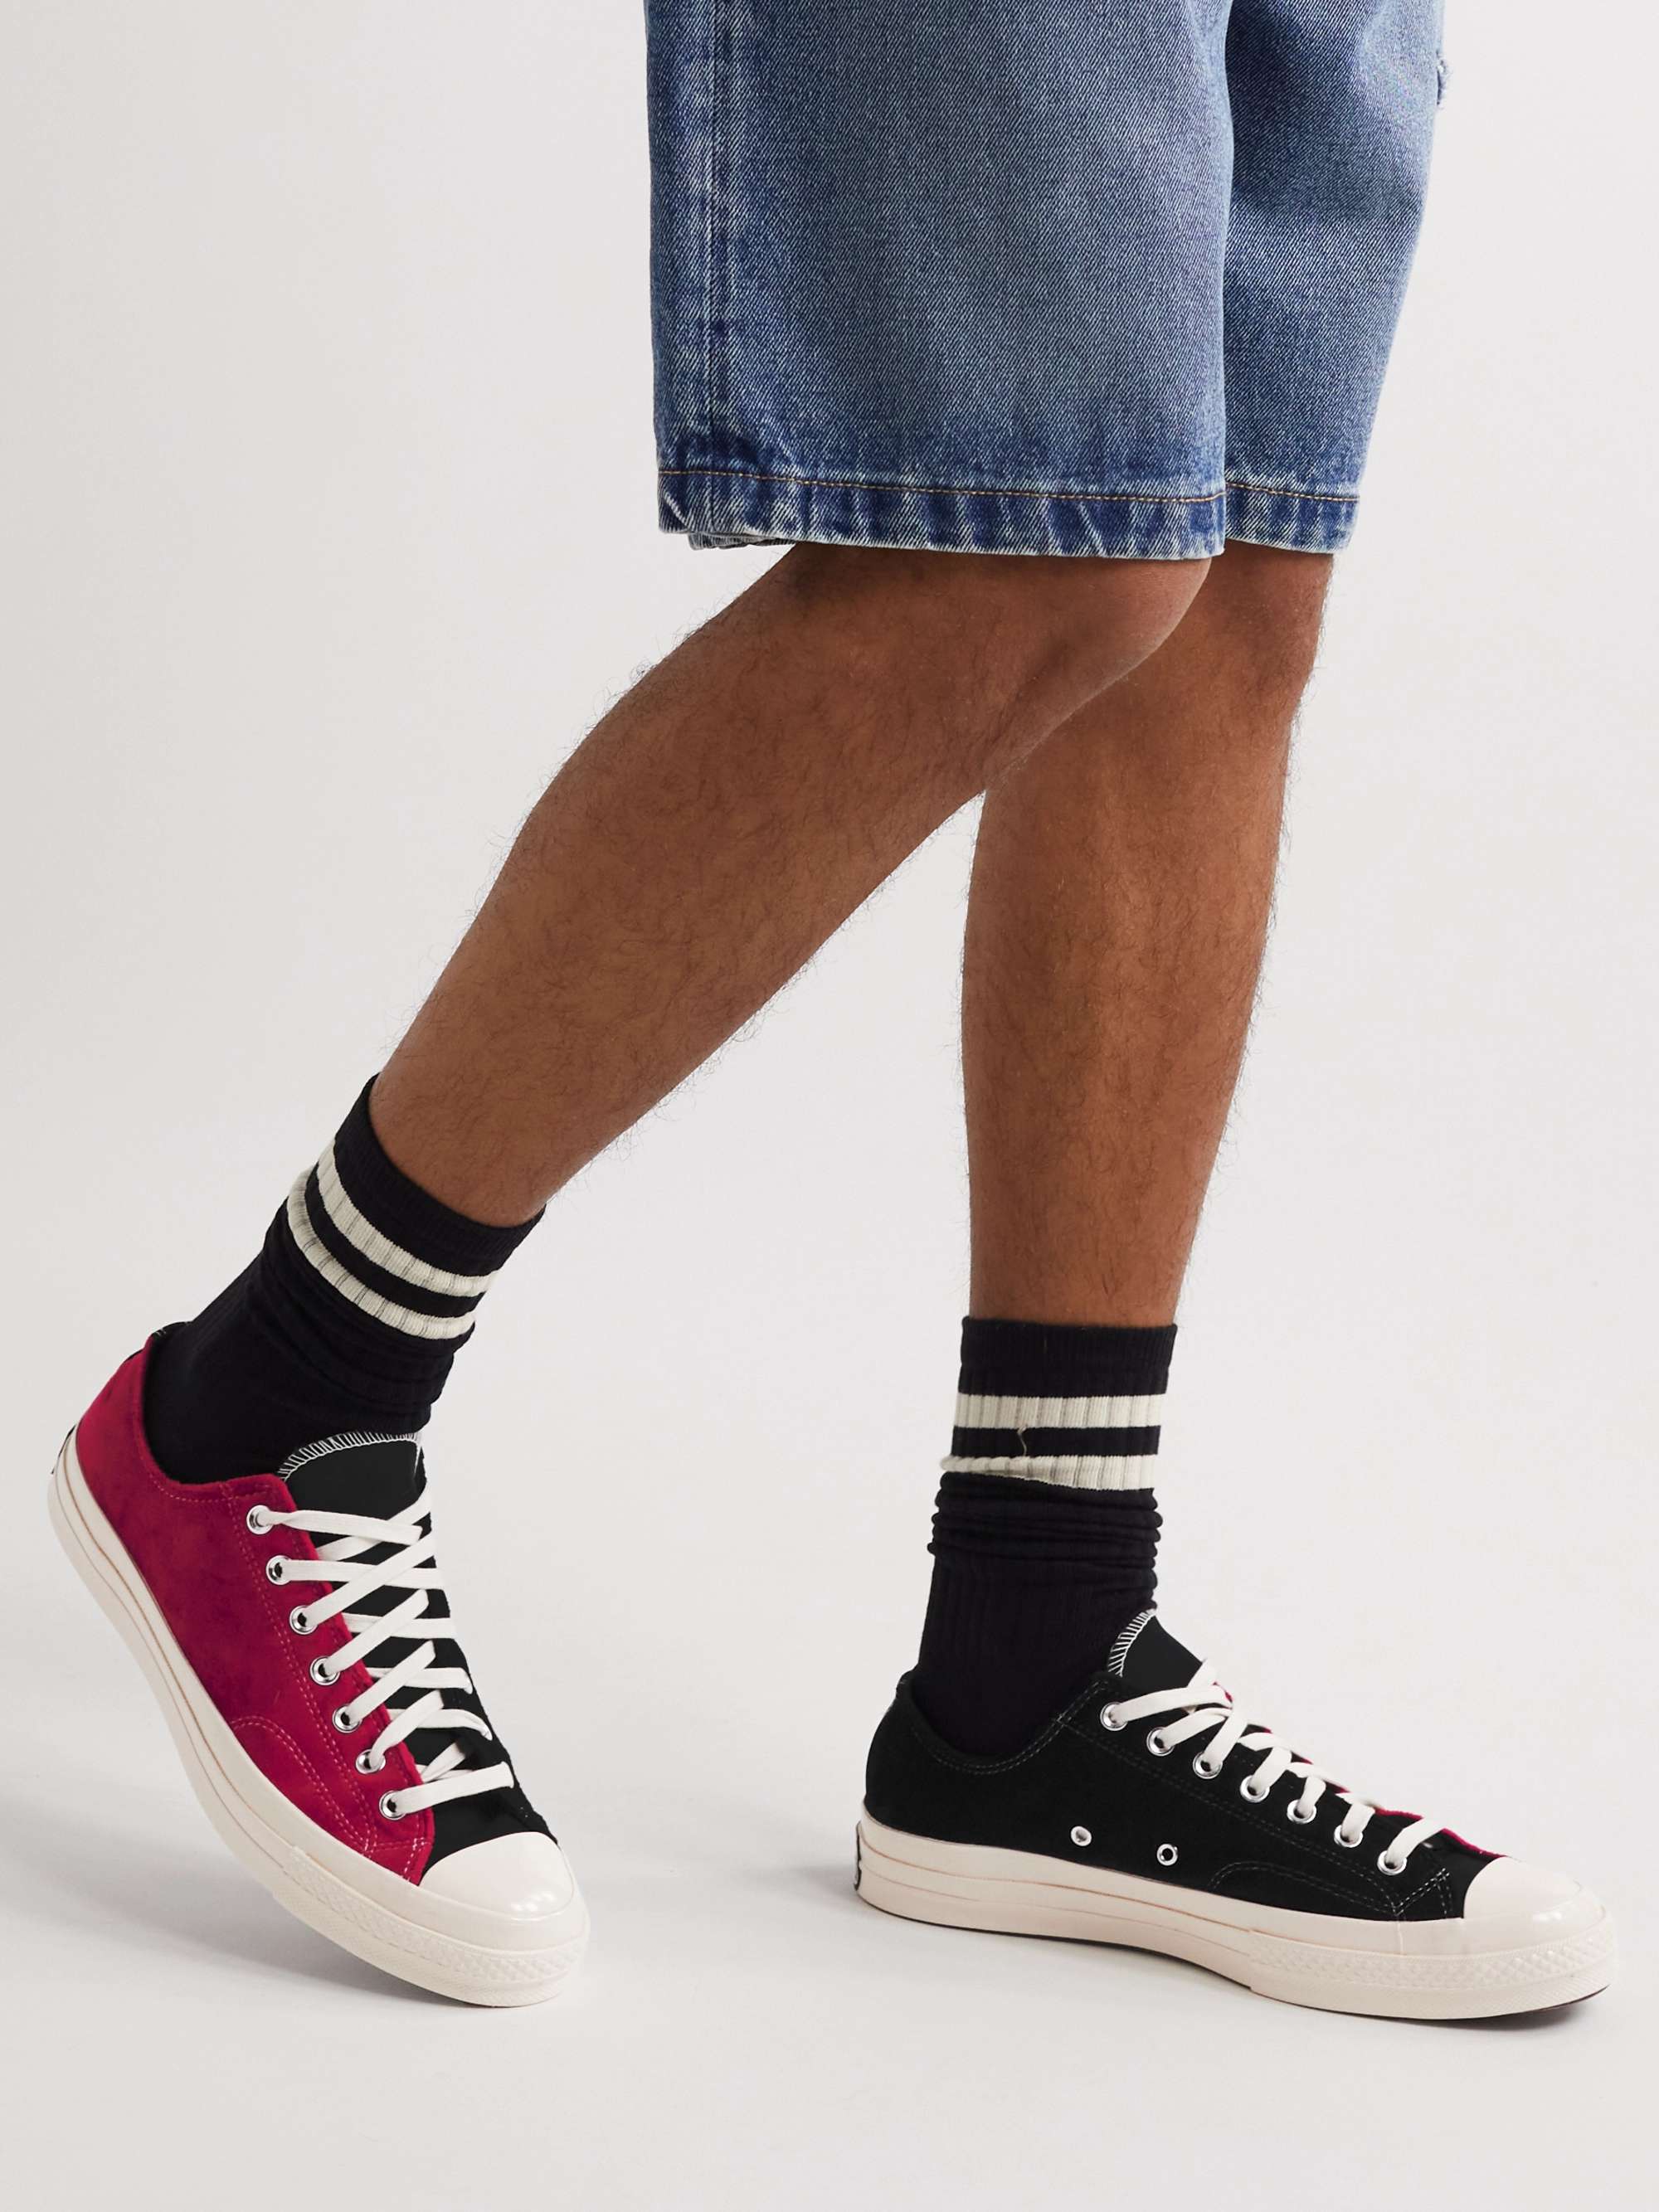 CONVERSE + Beyond Retro Chuck 70 Upcycled Two-Tone Velvet Sneakers | MR  PORTER